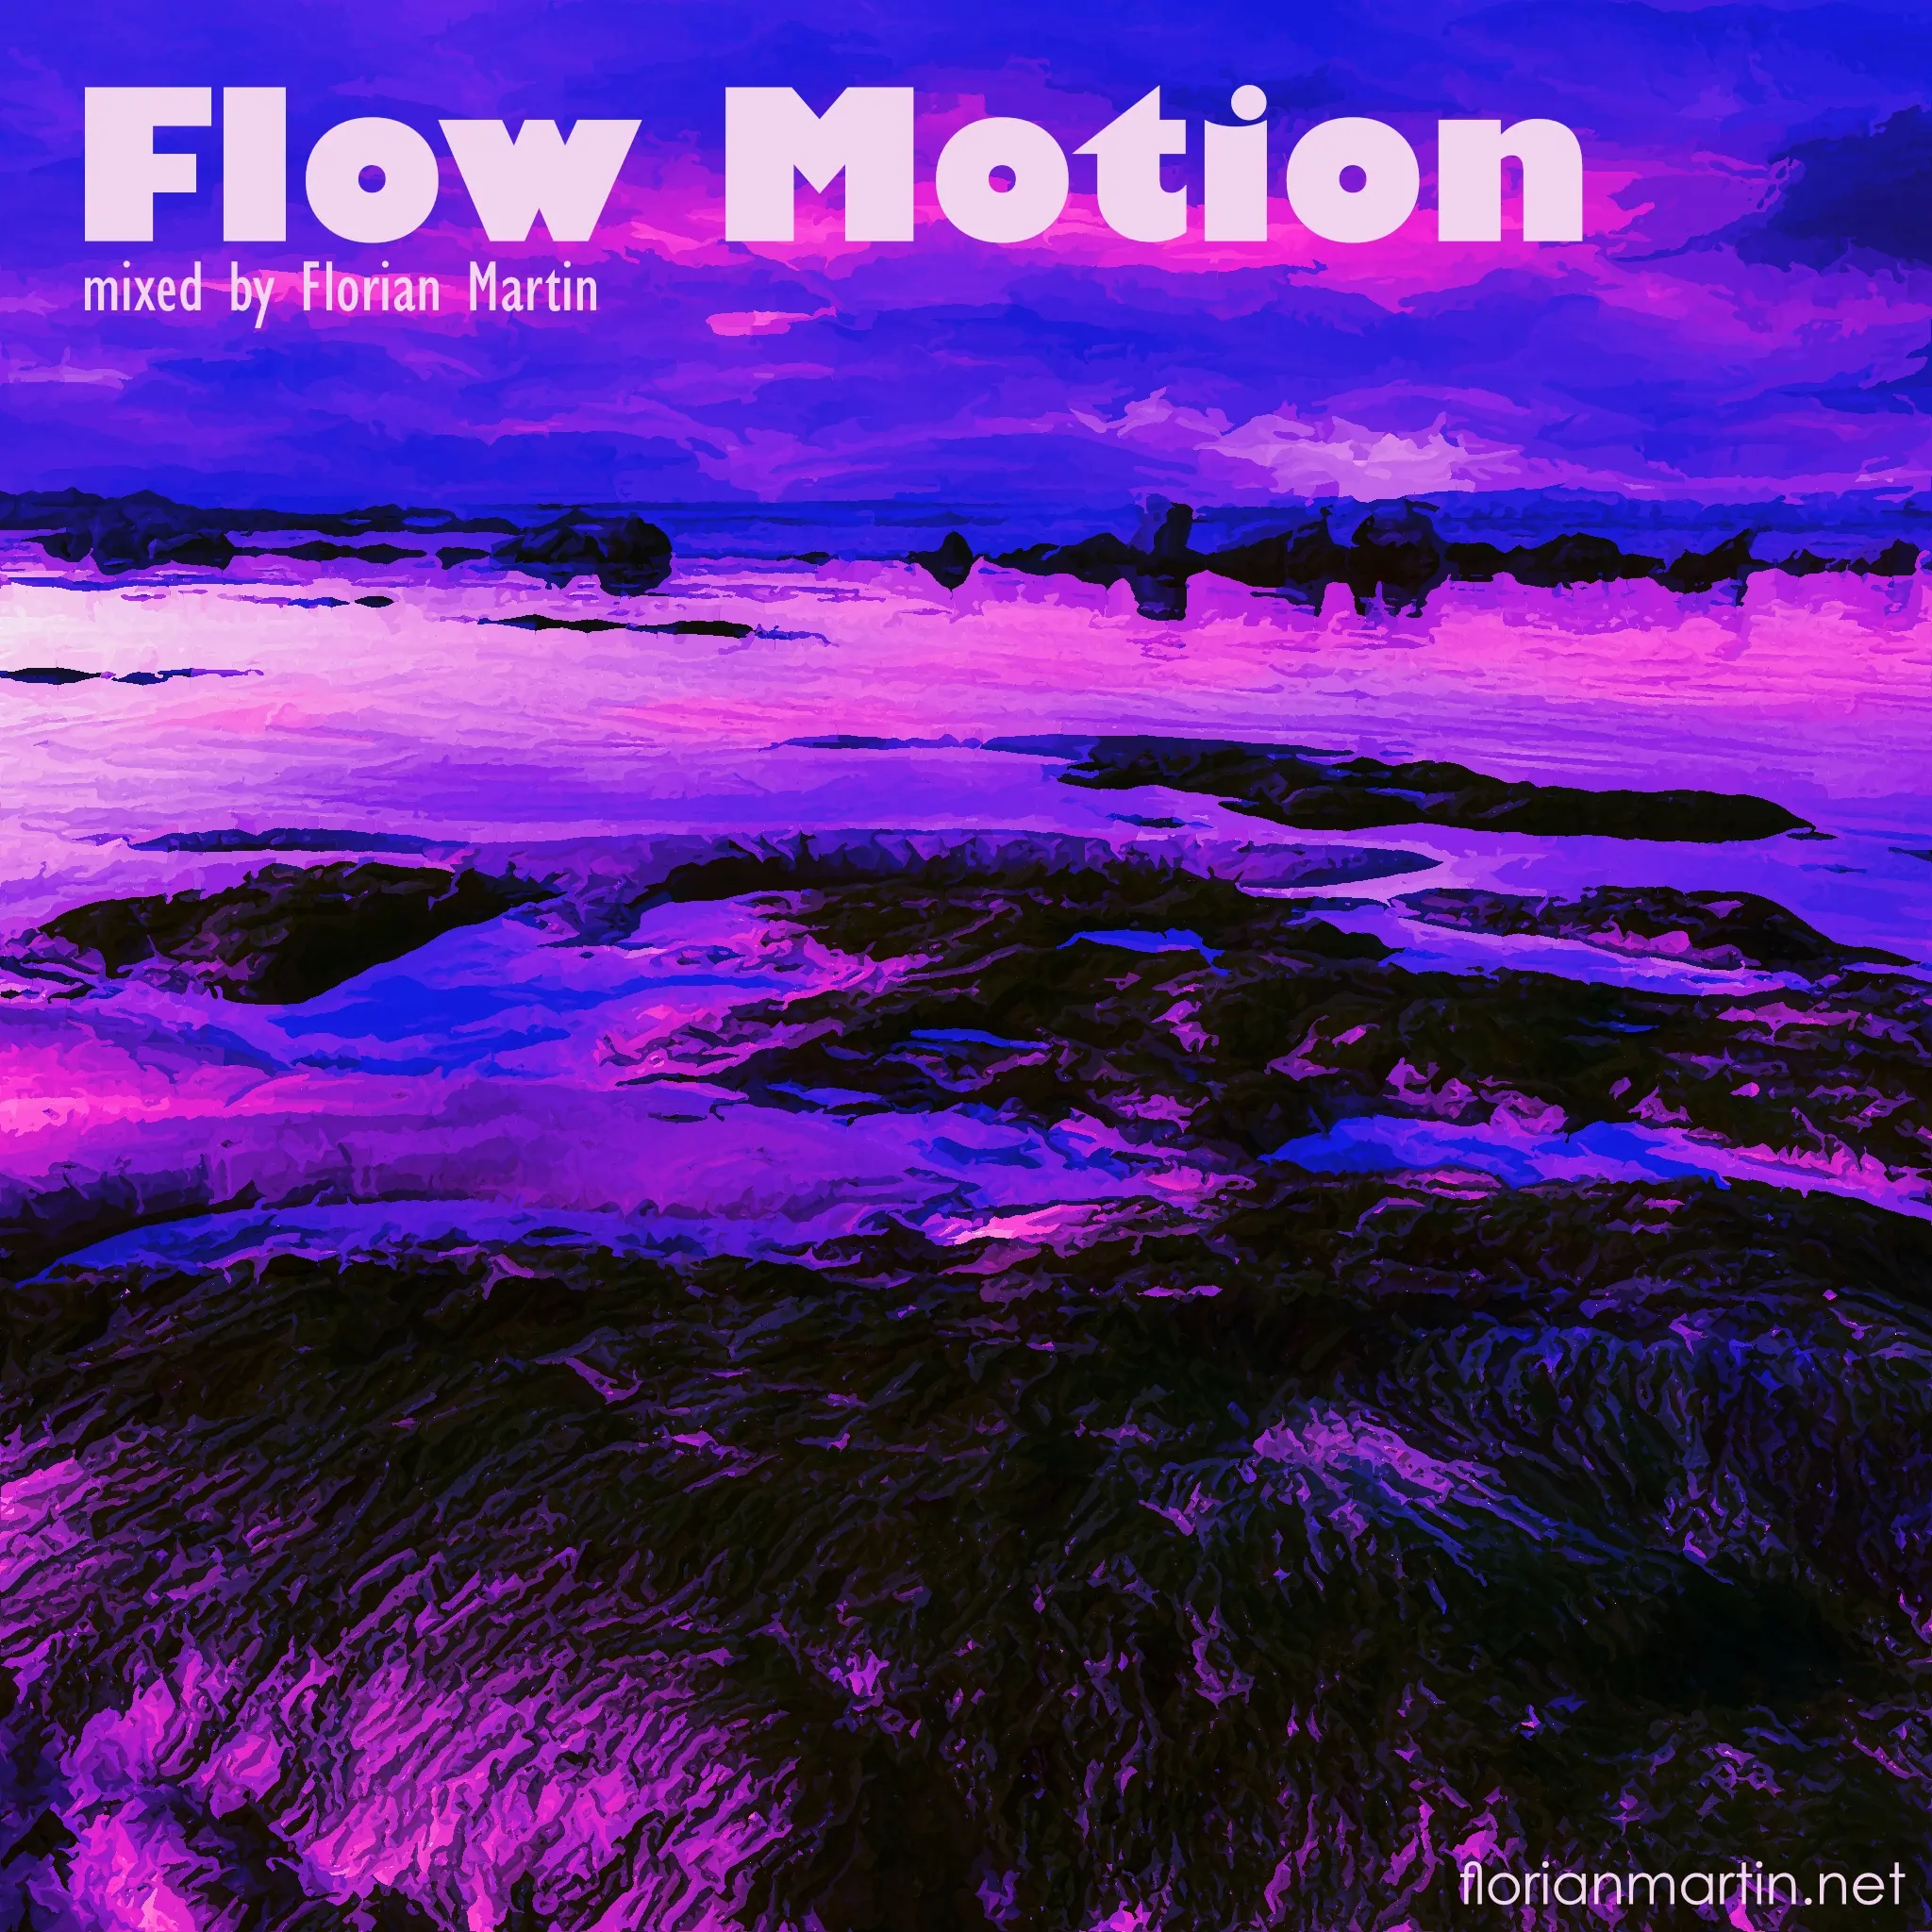 Flow Motion (mixed by Florian Martin)